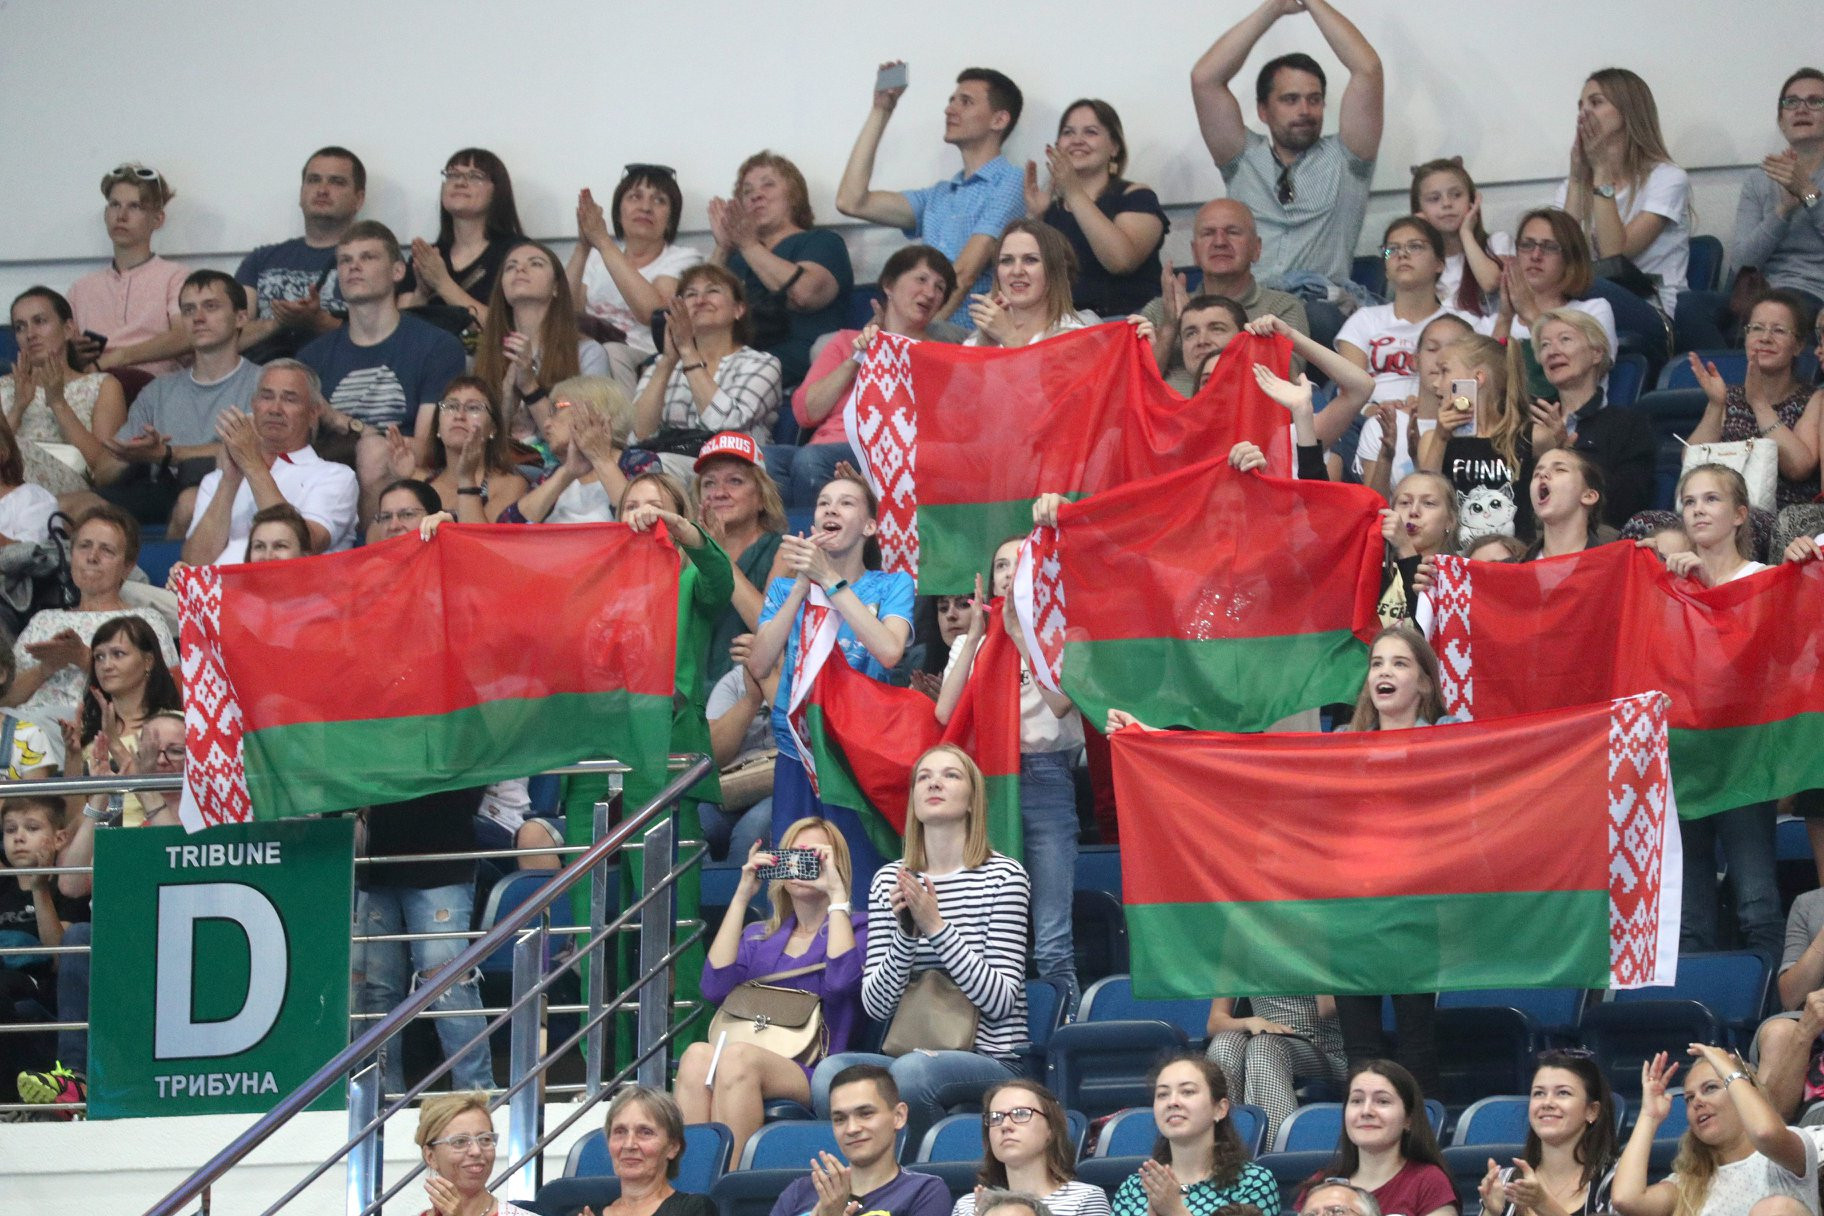 A sizeable Belarusian crowd were in attendance at Minsk Arena, where rhythmic and acrobatic gymnastics were taking place ©Minsk 2019